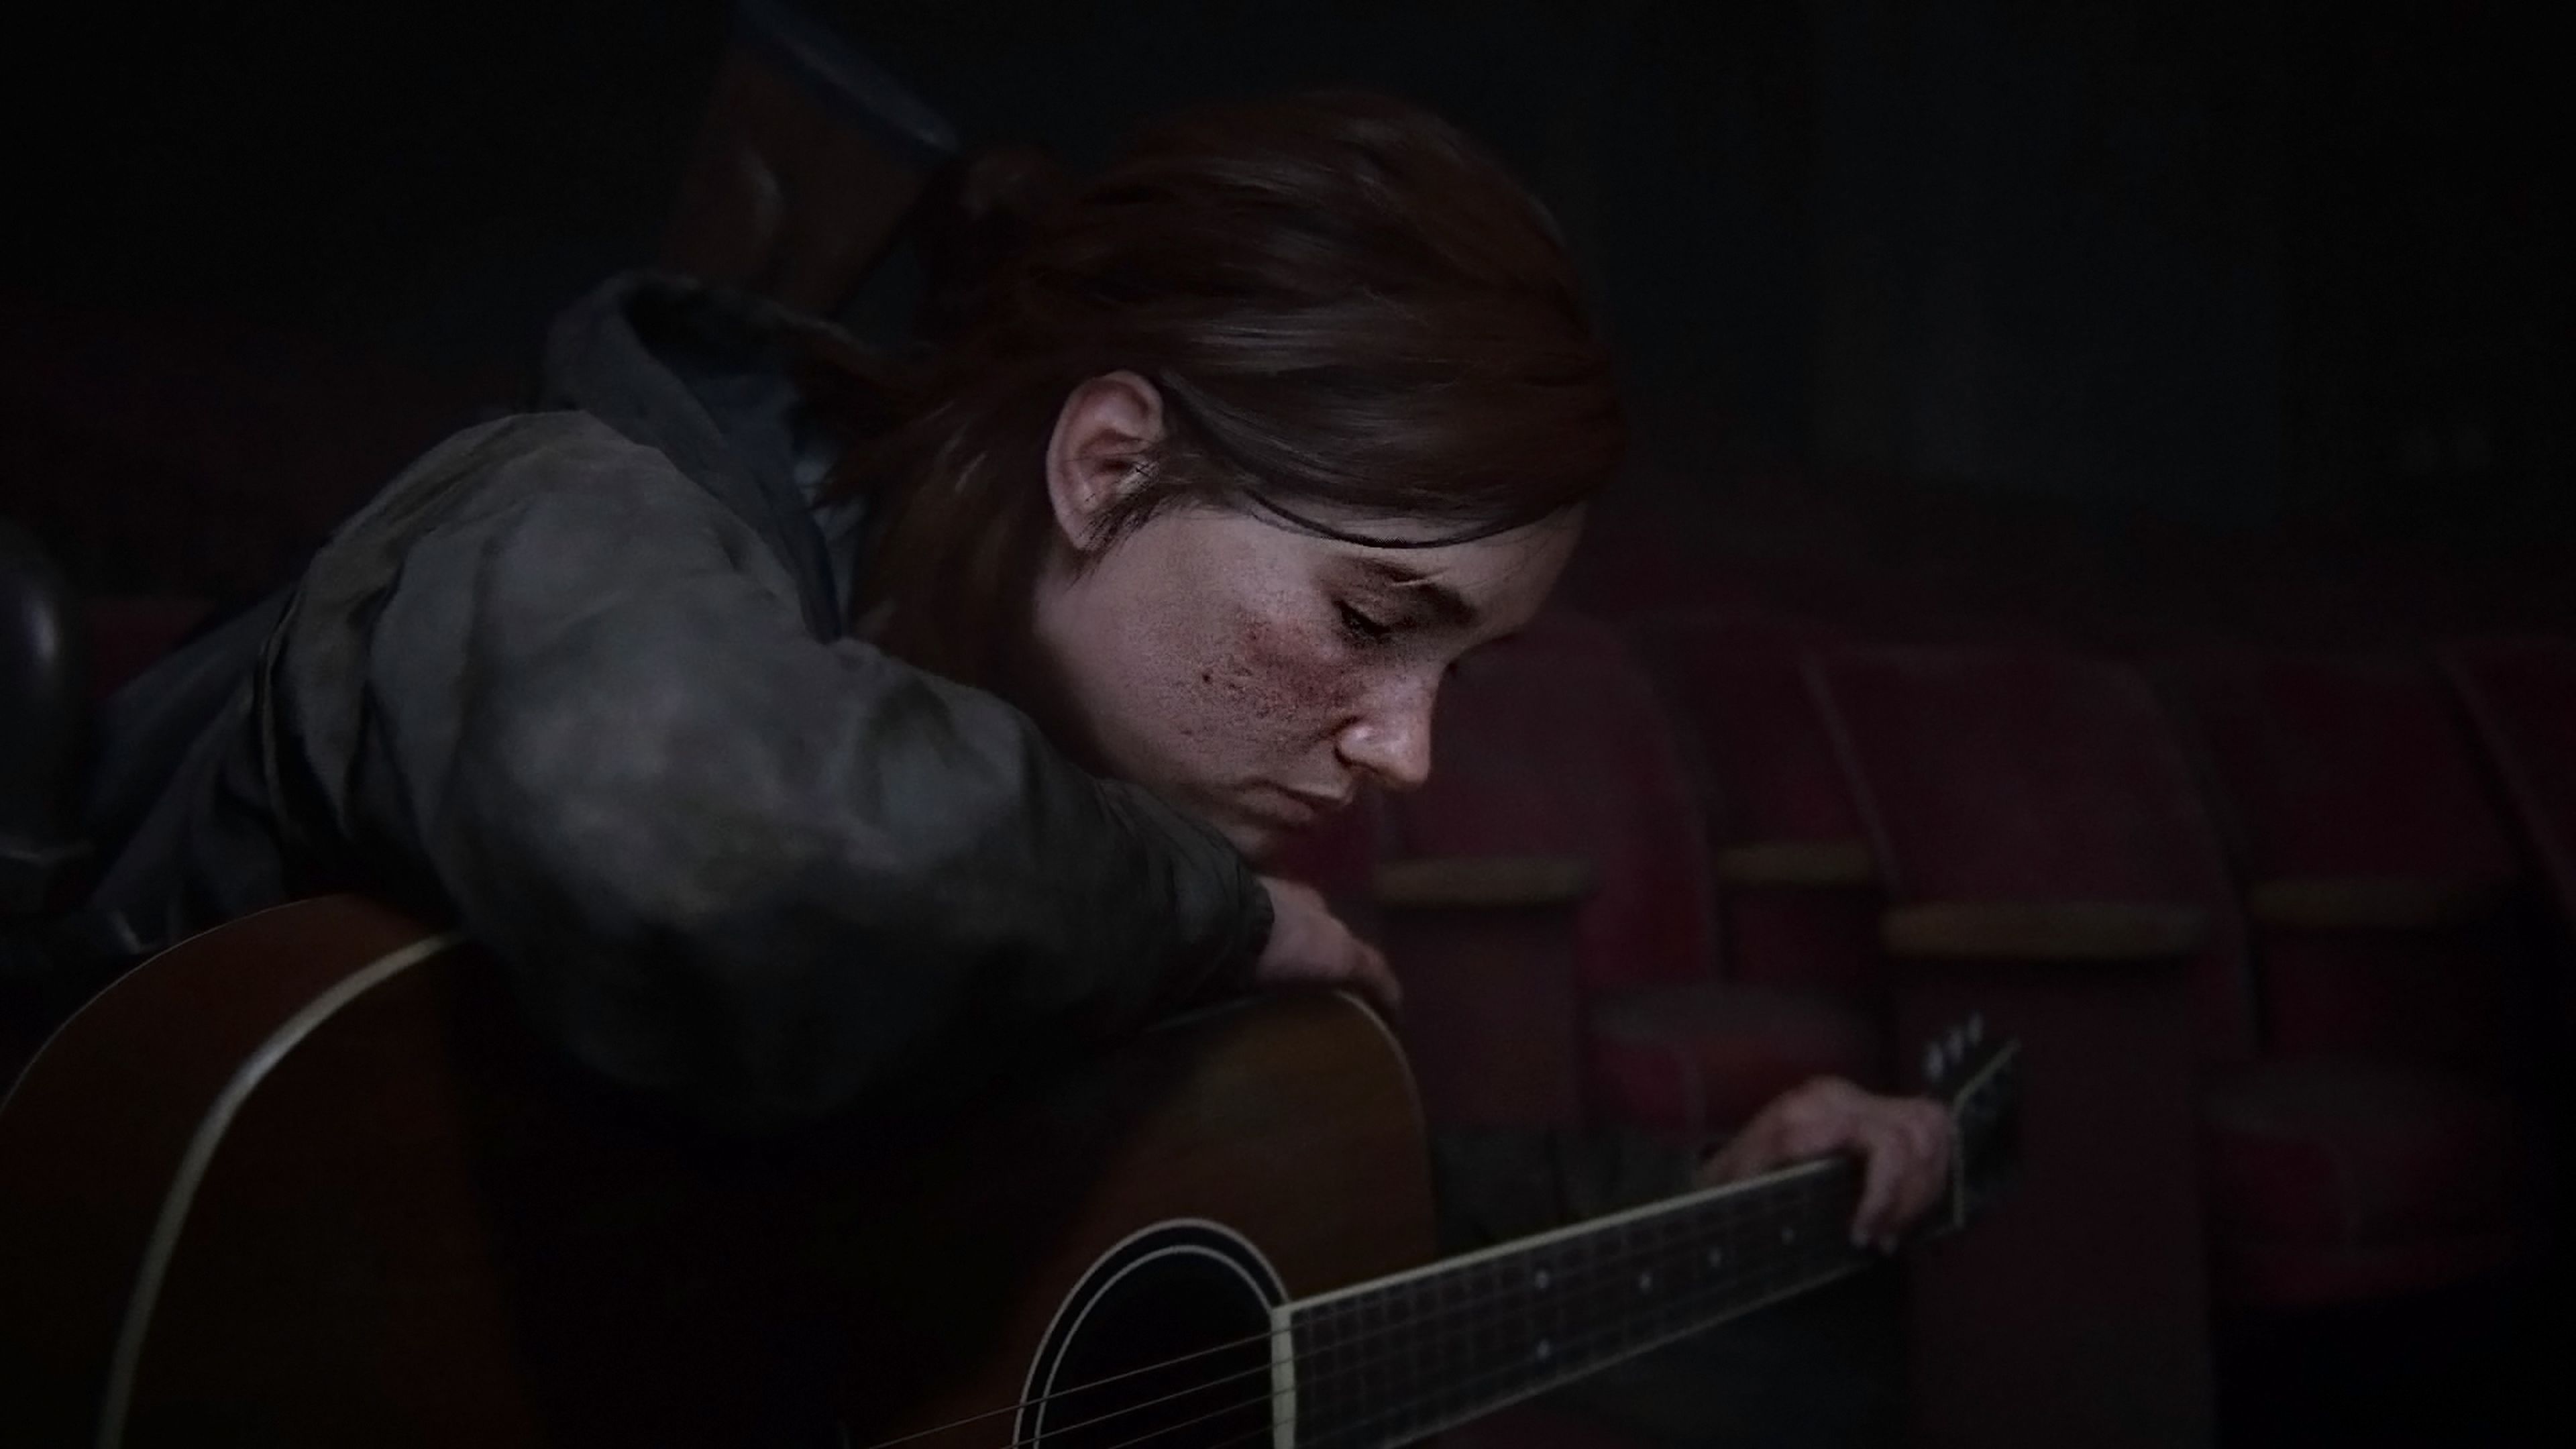 The Last of Us Parte 2